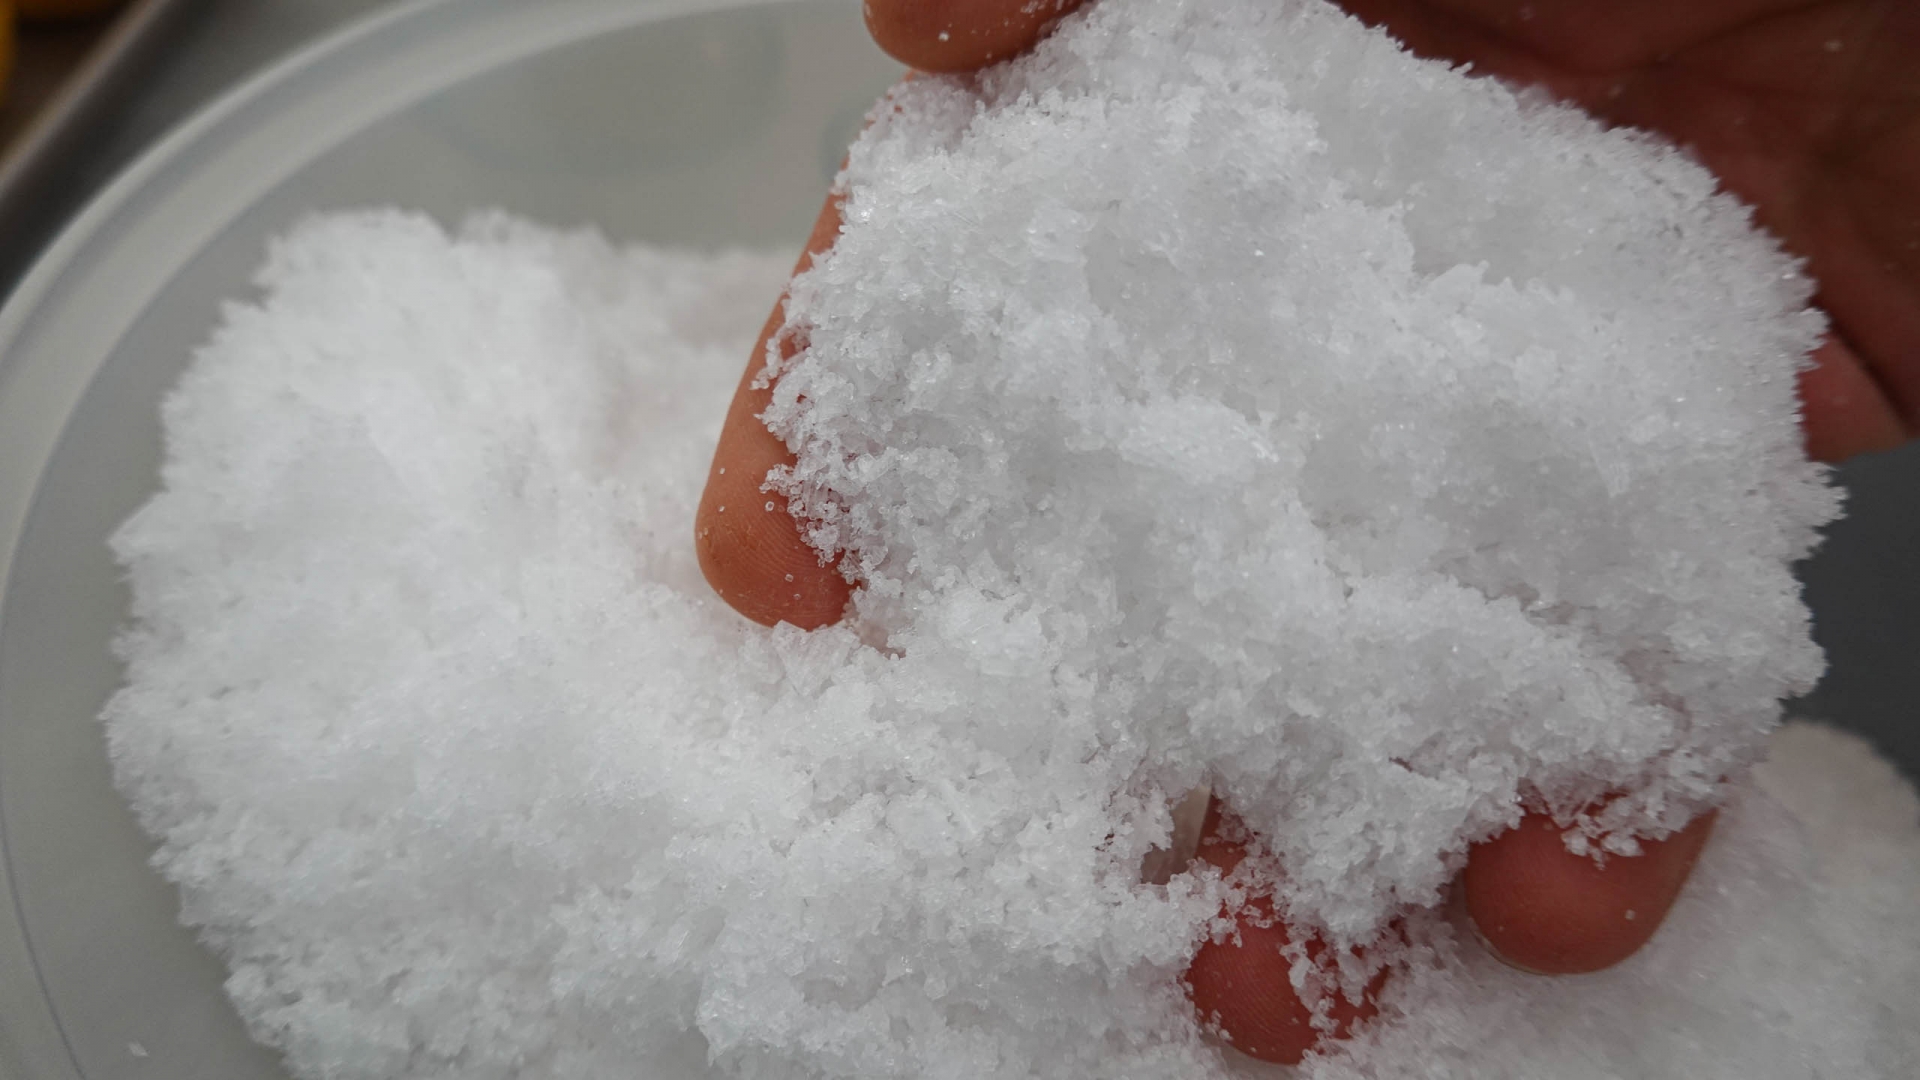 A bowl full of fine sea salt scooped out by hand